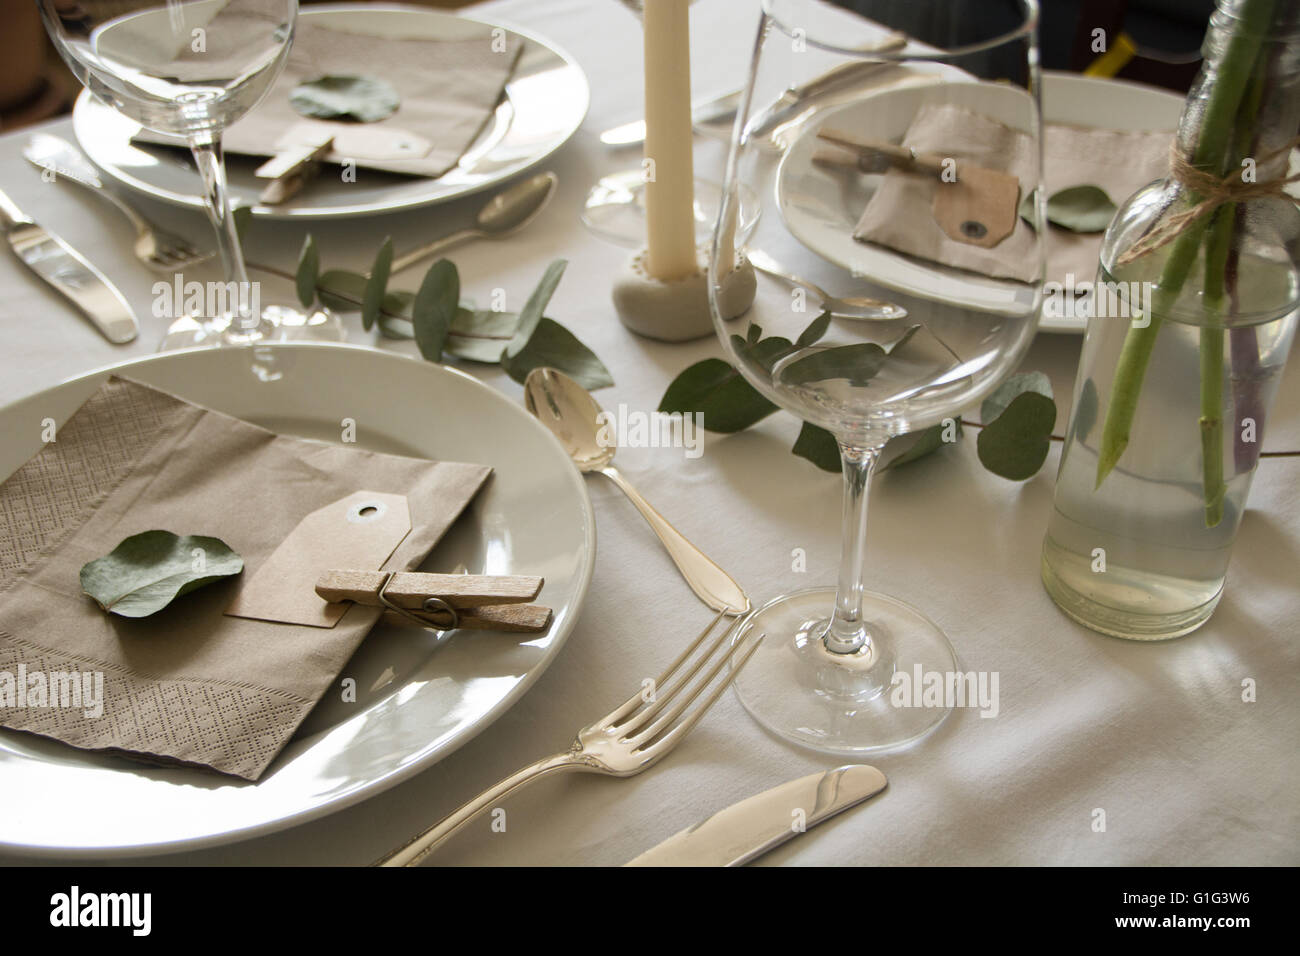 A table set for a meal, eucalyptus decoration, vintage style Stock Photo